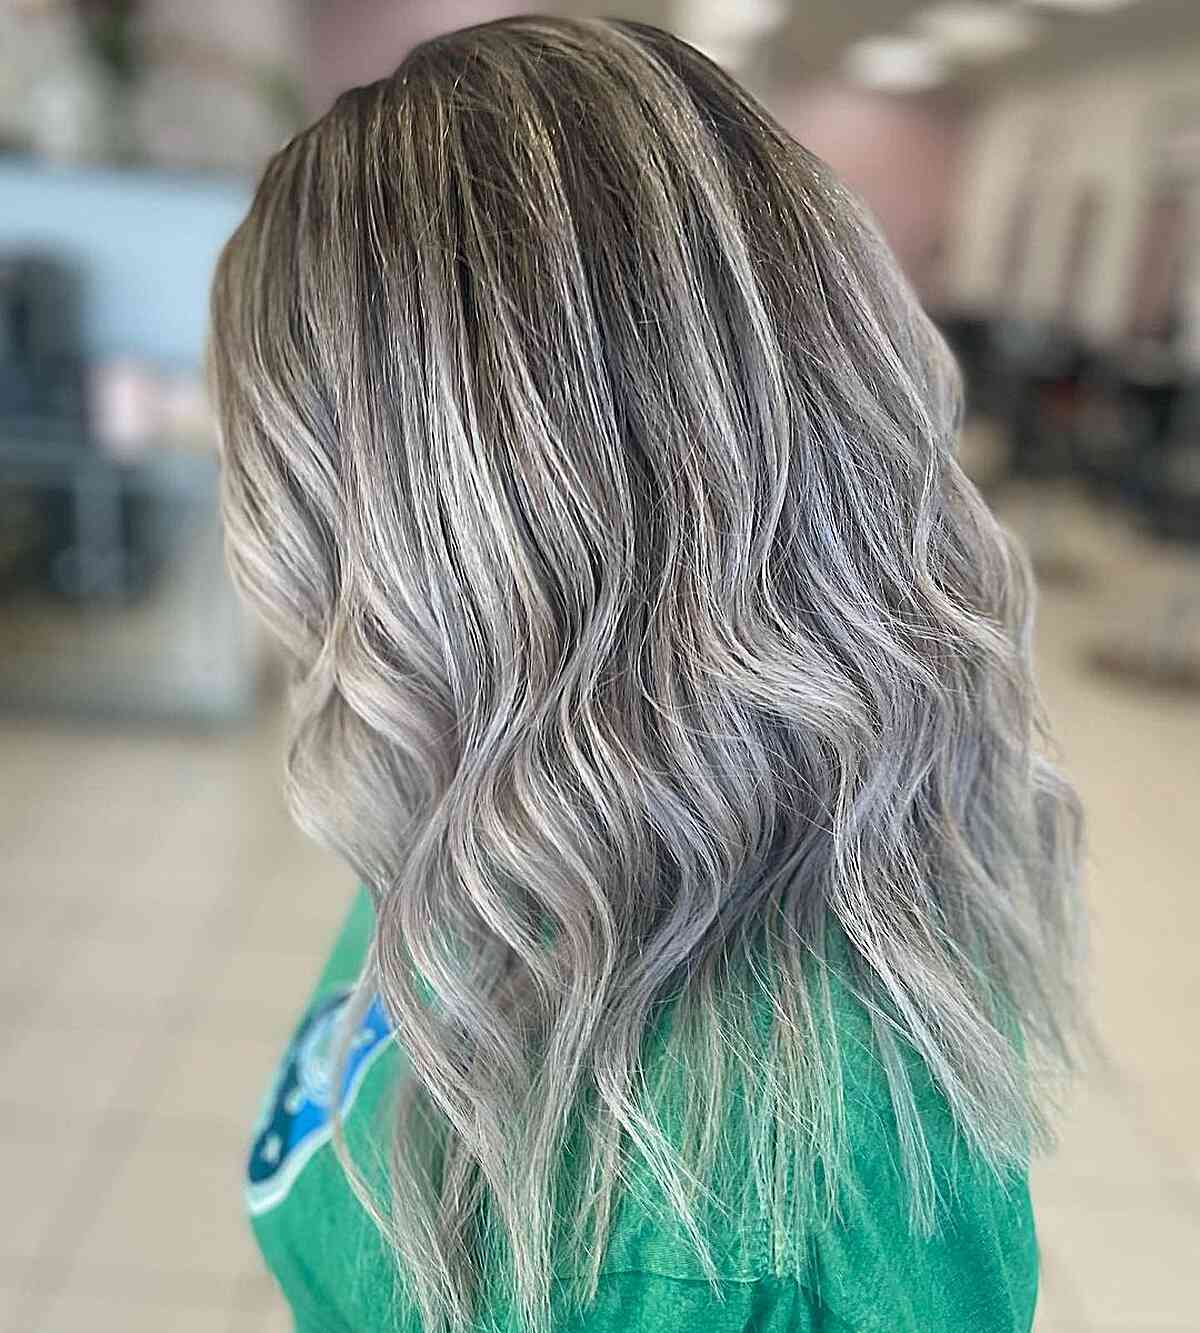 Shoulder-Length Icy Silver Balayage Ombre Hair